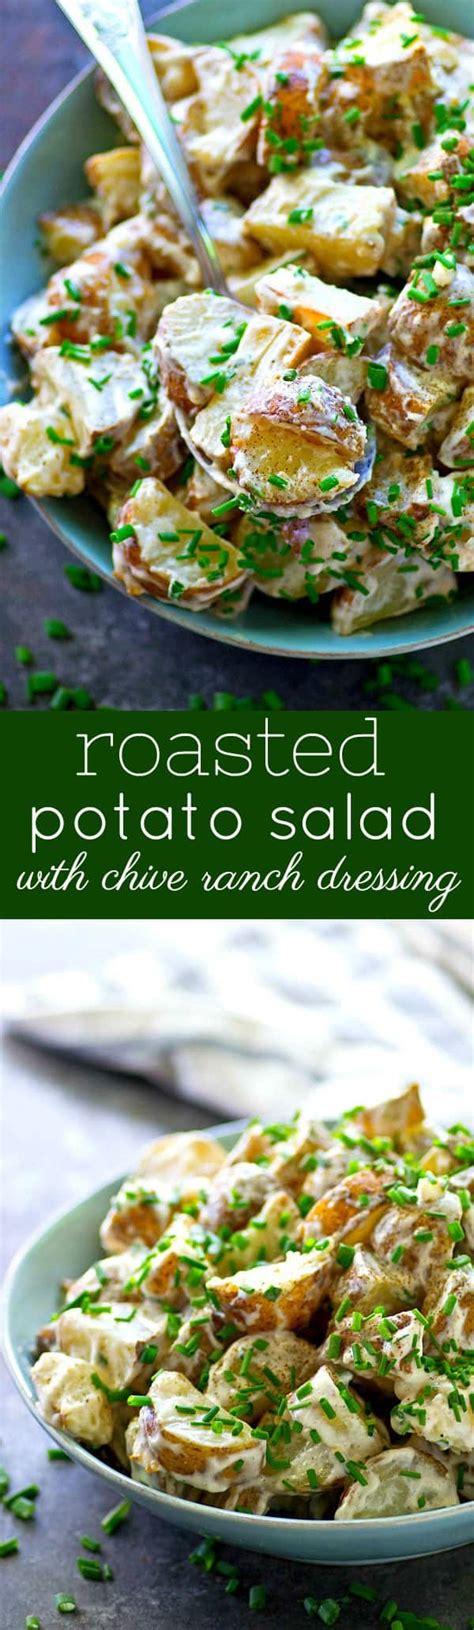 If you're in a pinch, you can chop the potatoes, remember. Roasted Potato Salad with Chive Ranch Dressing